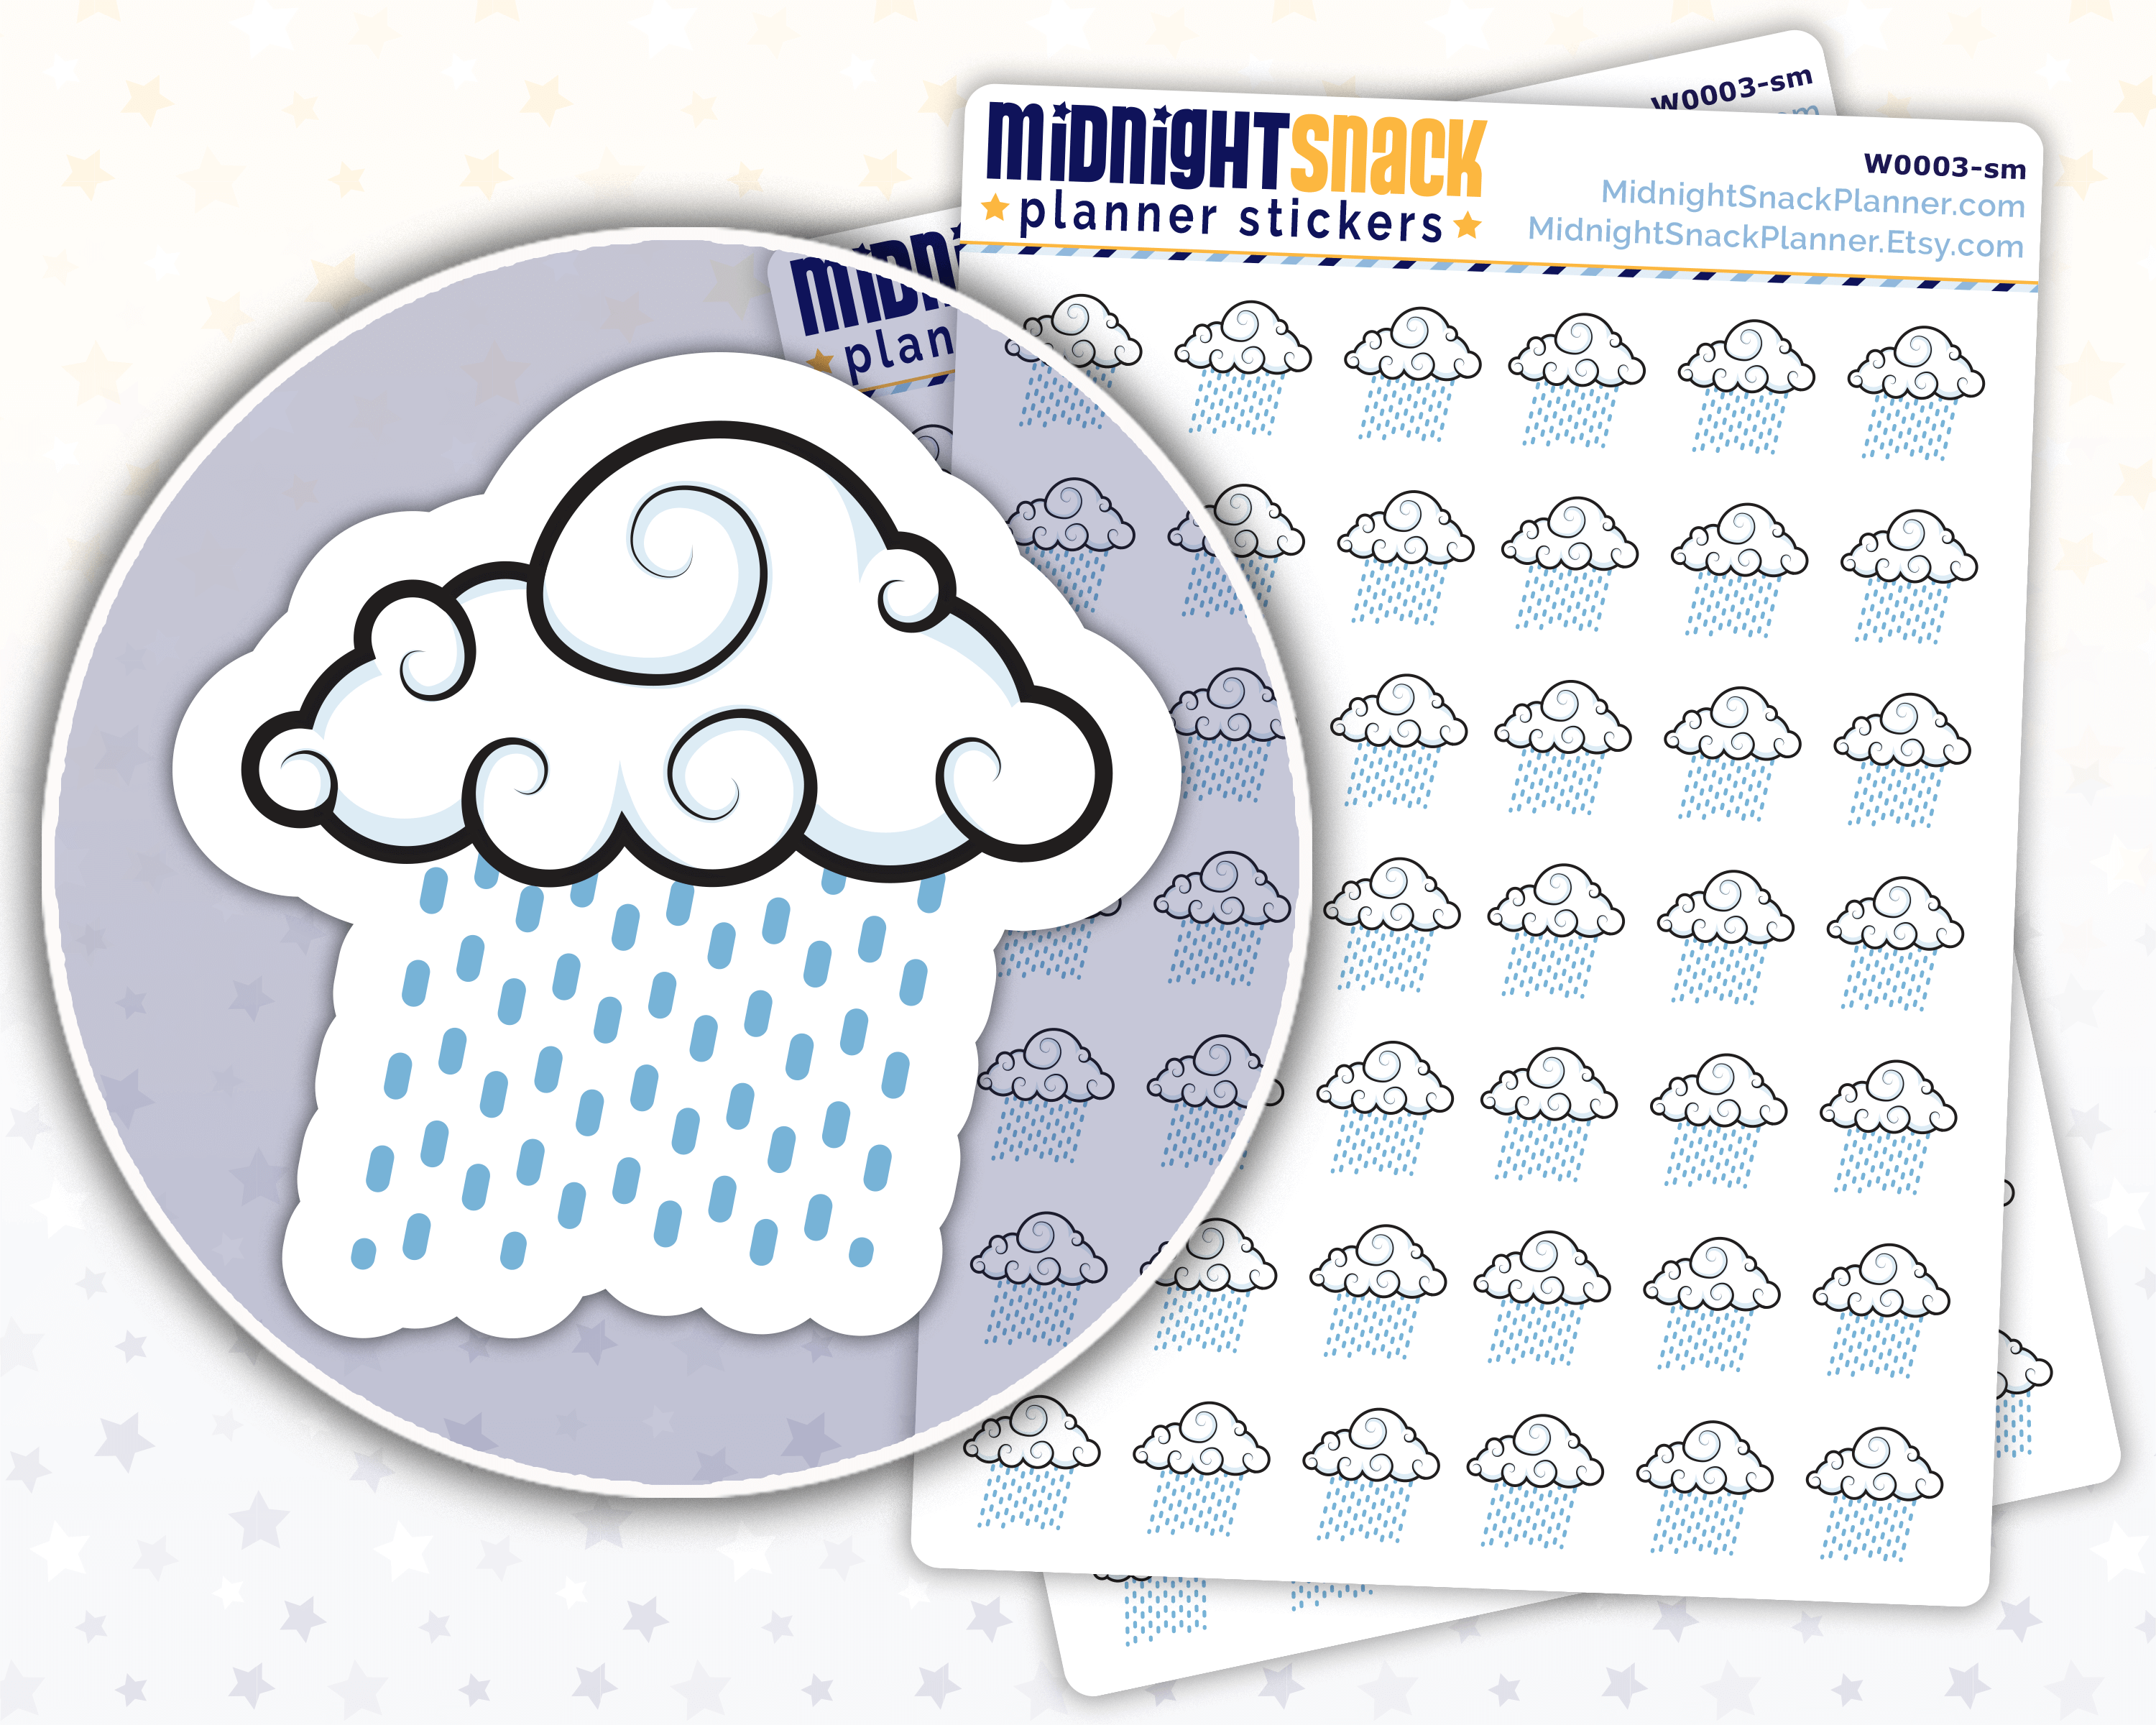 Pouring Rain Icon: Weather Planner Stickers Midnight Snack Planner